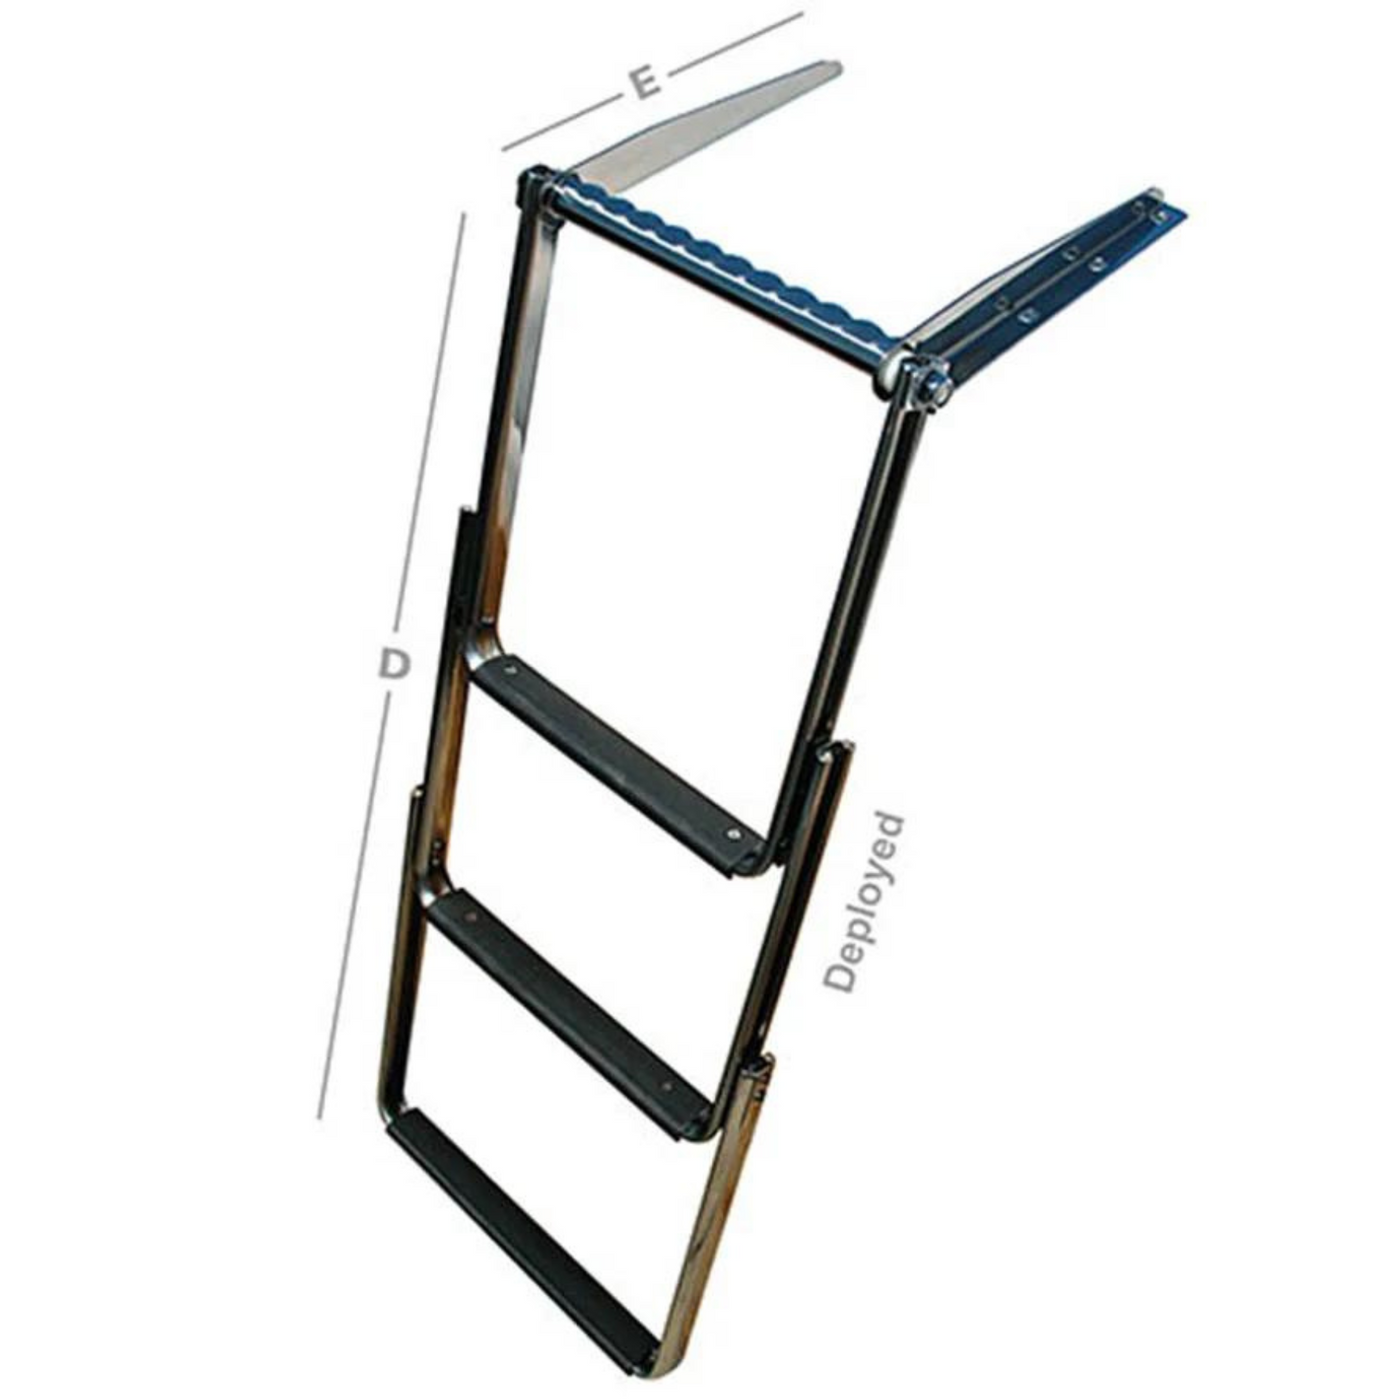 3-STEP TOP POCKET-MOUNT FIXED STAINLESS STEEL LADDER